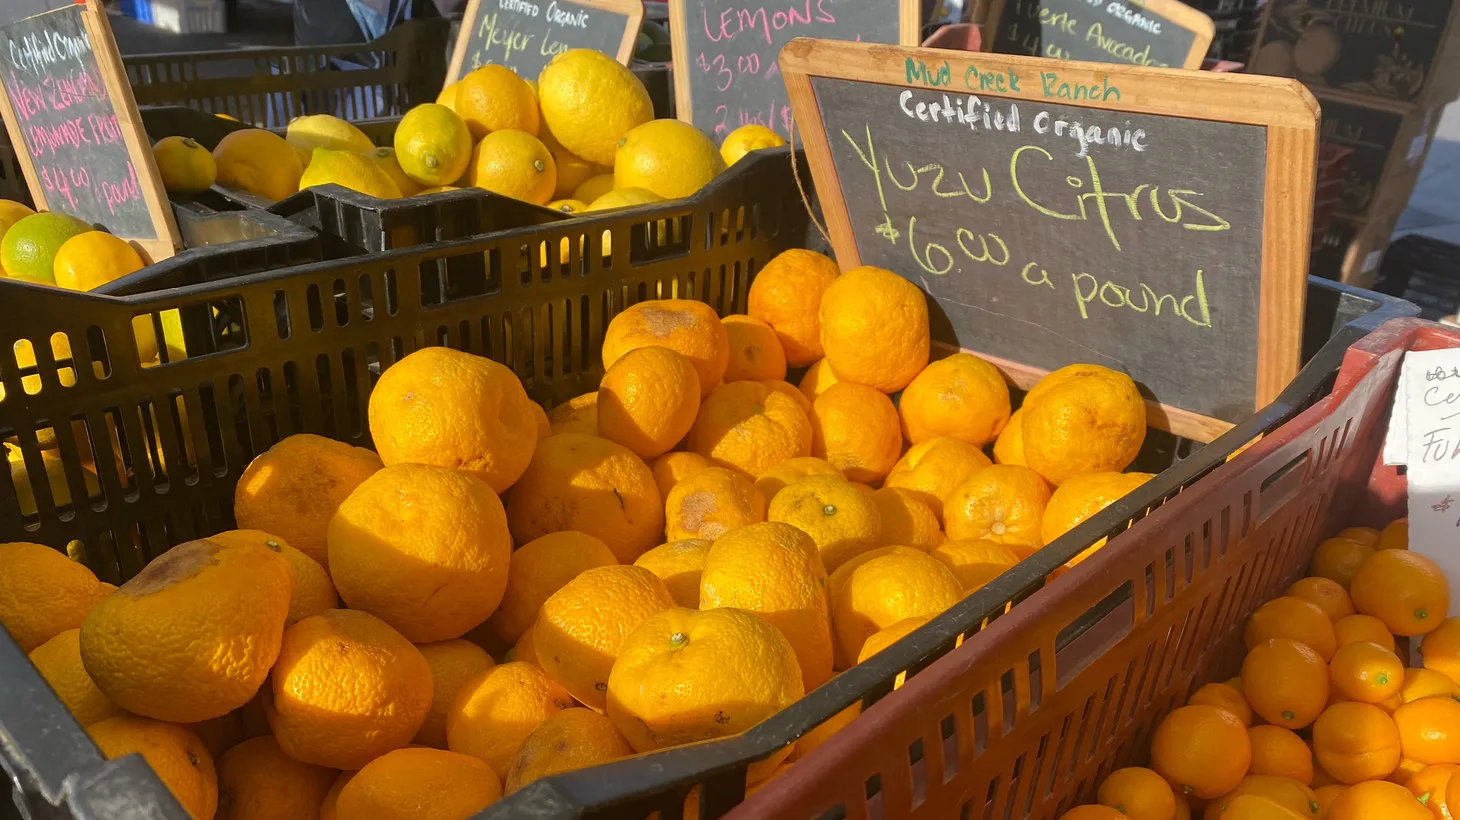 Yuzu citrus hits notes of jasmine and orange blossom and has just become more popular in Southern California farmers’ markets.